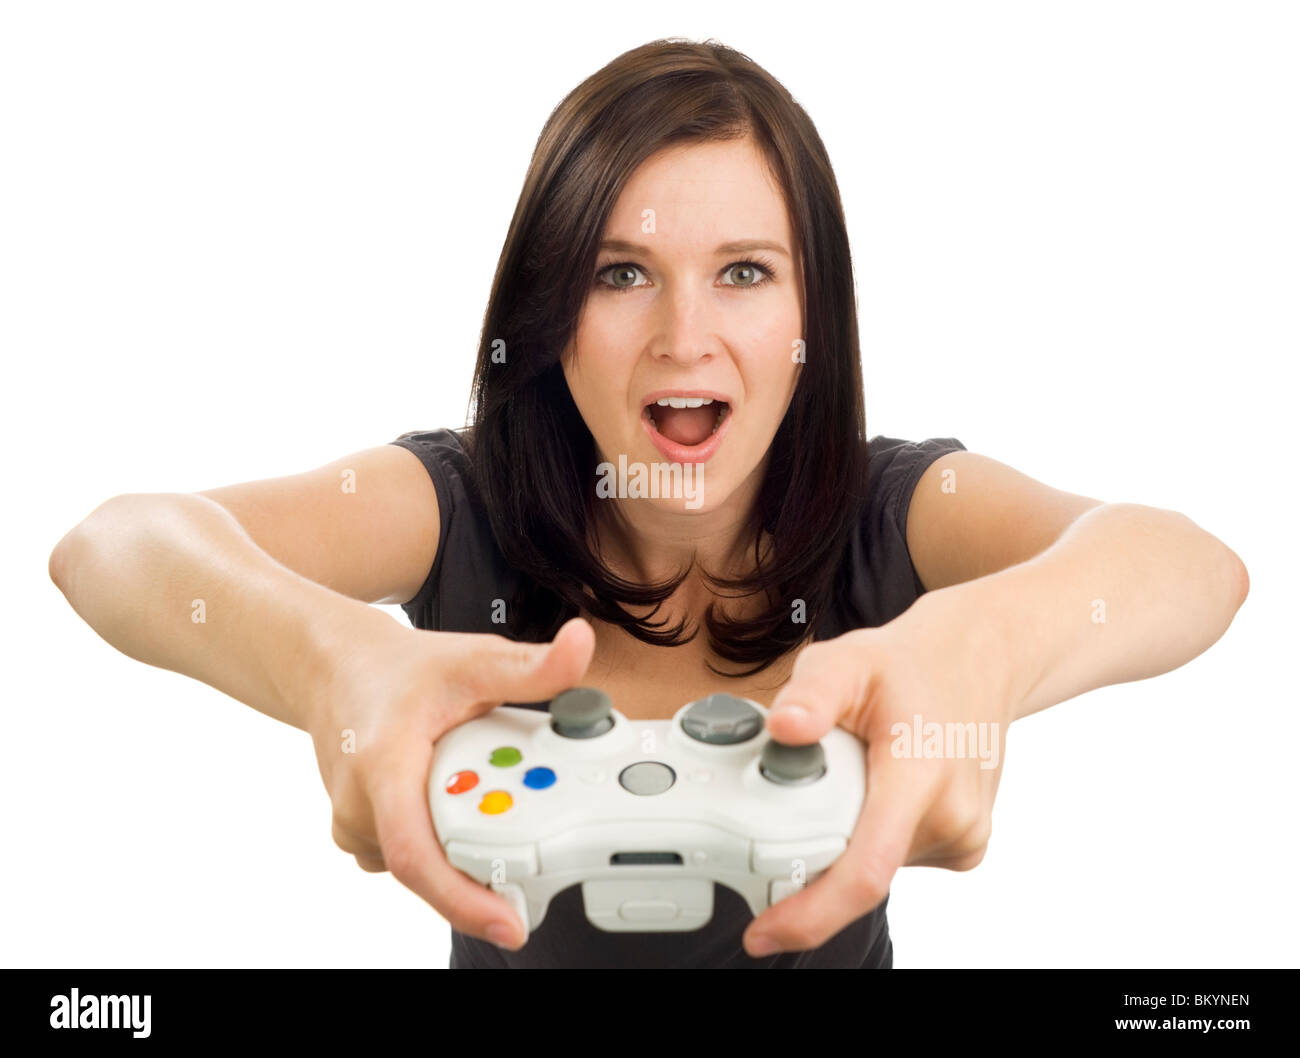 Girl holds an Xbox video game controller with her mouth open and a  surprised look on her face Stock Photo - Alamy